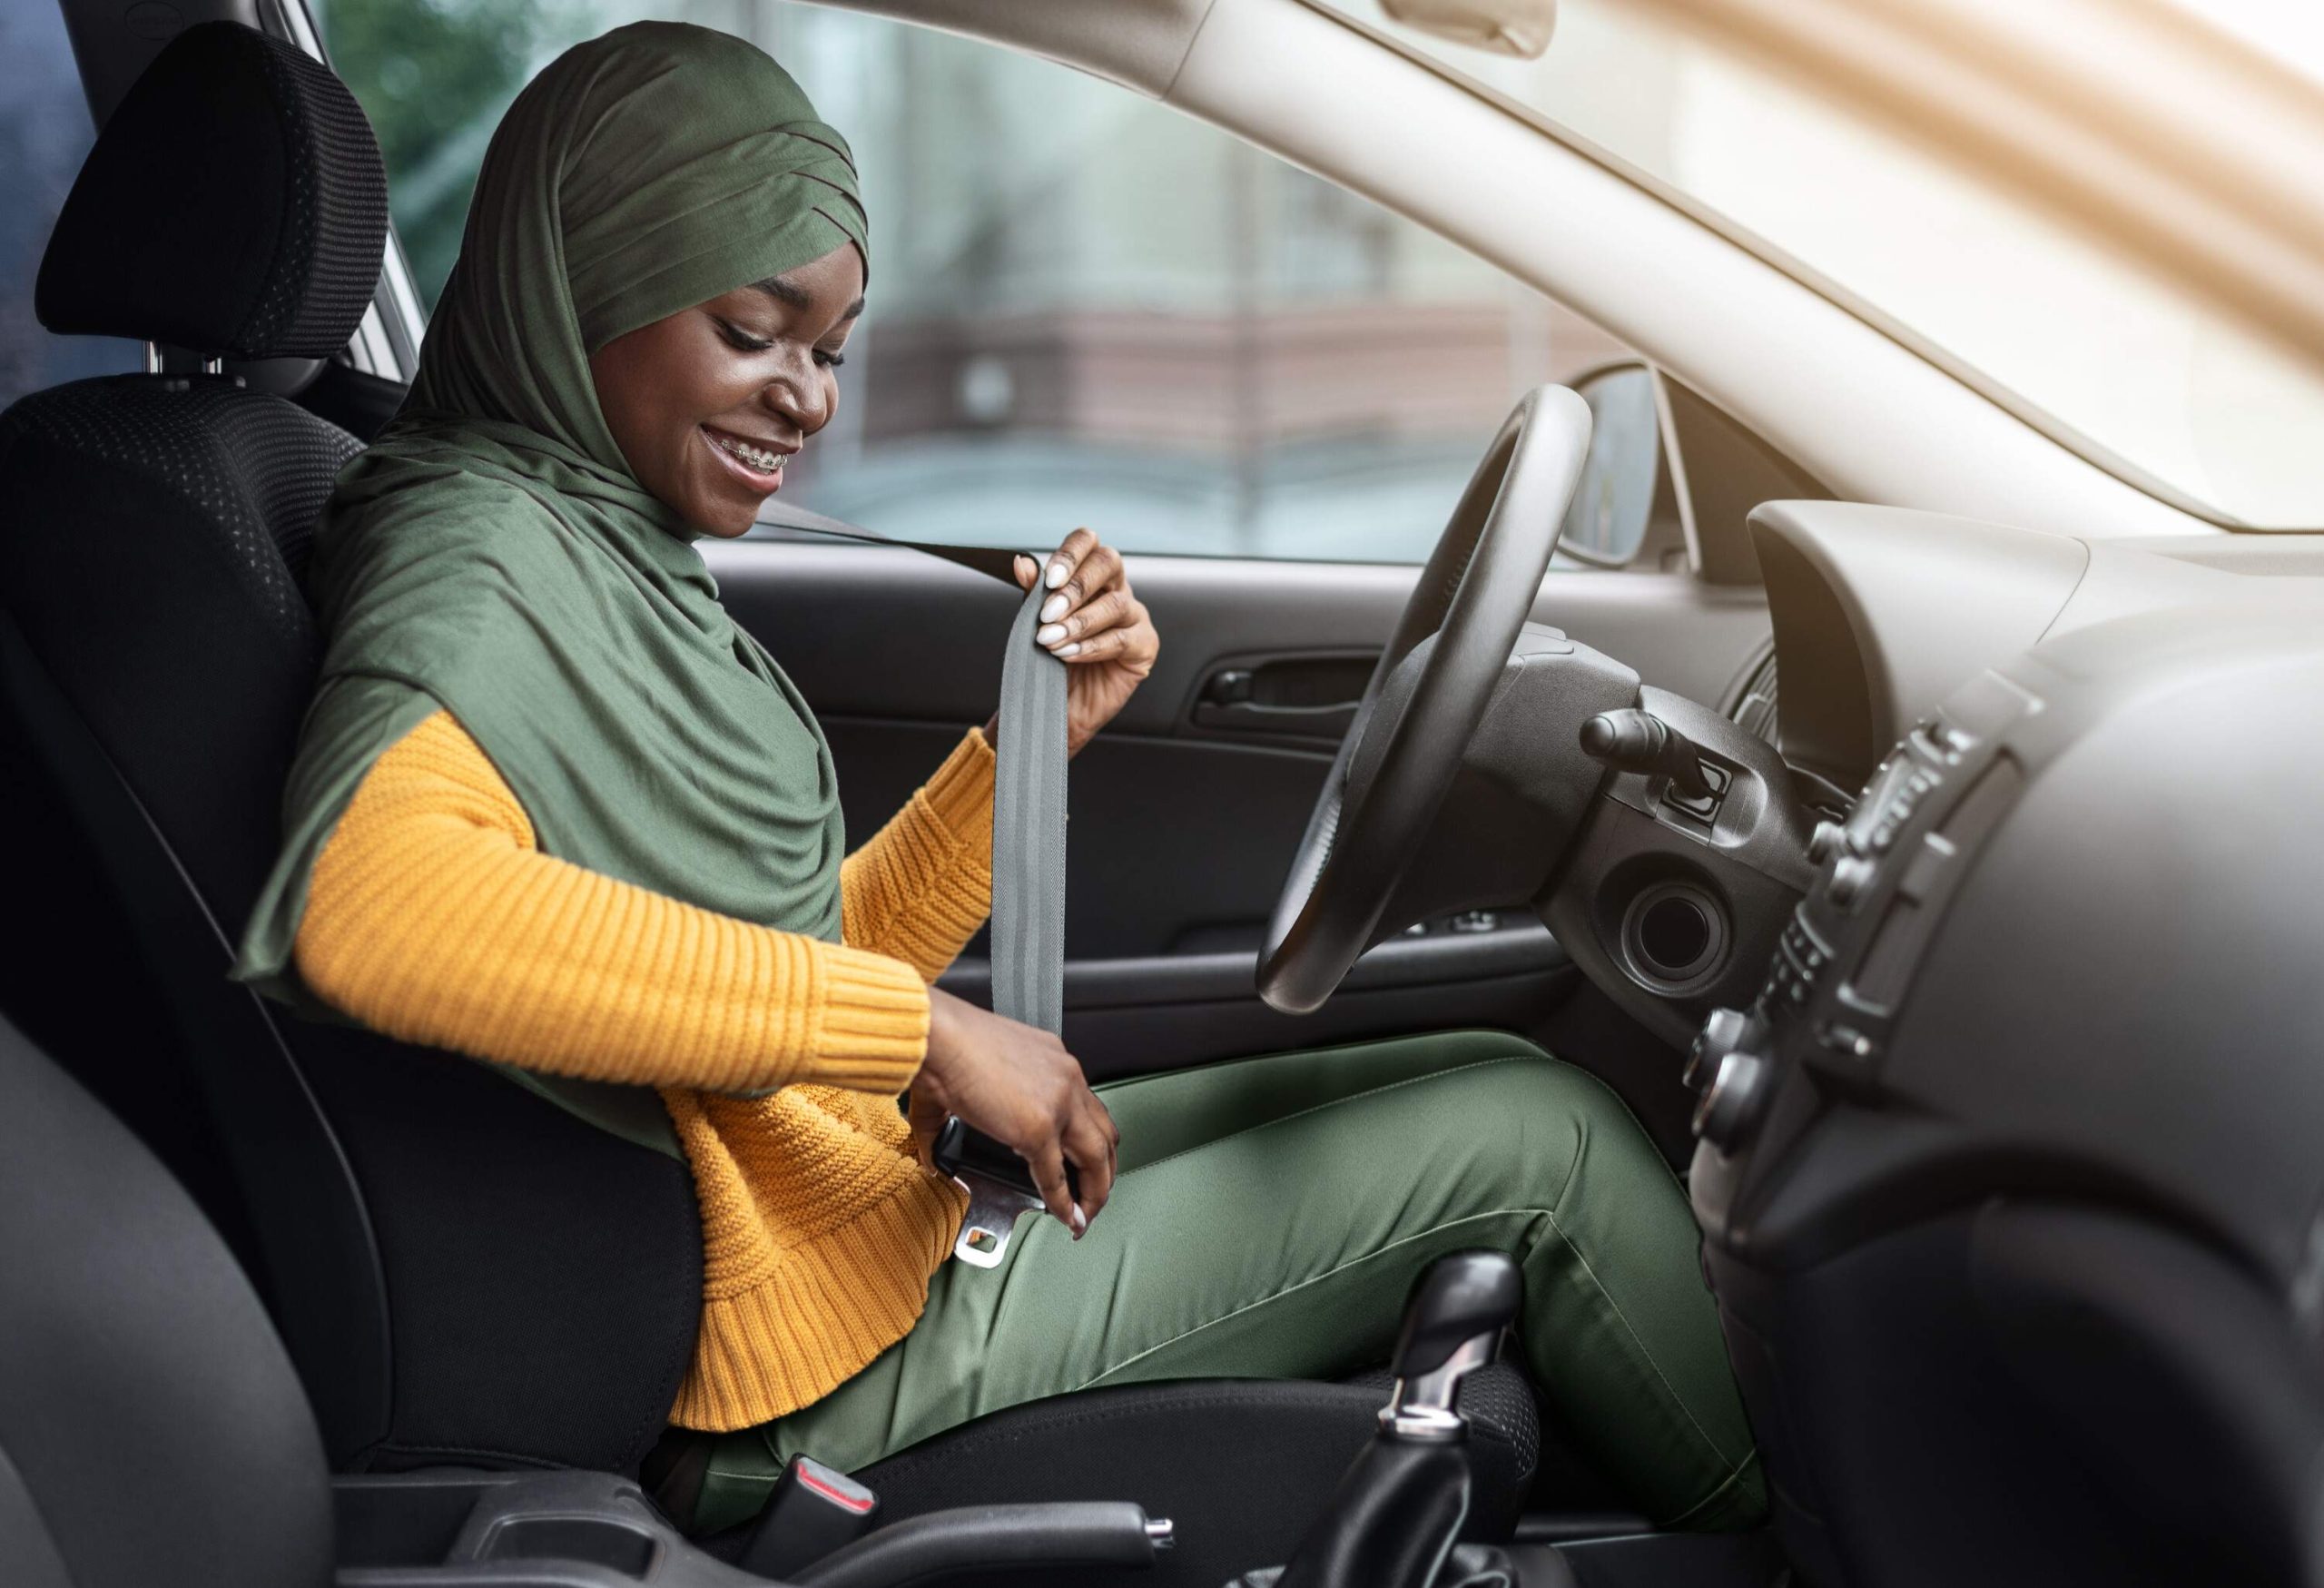 A woman wearing a hijab and a yellow sweater smiling as she buckles her seatbelt in the driver's seat.